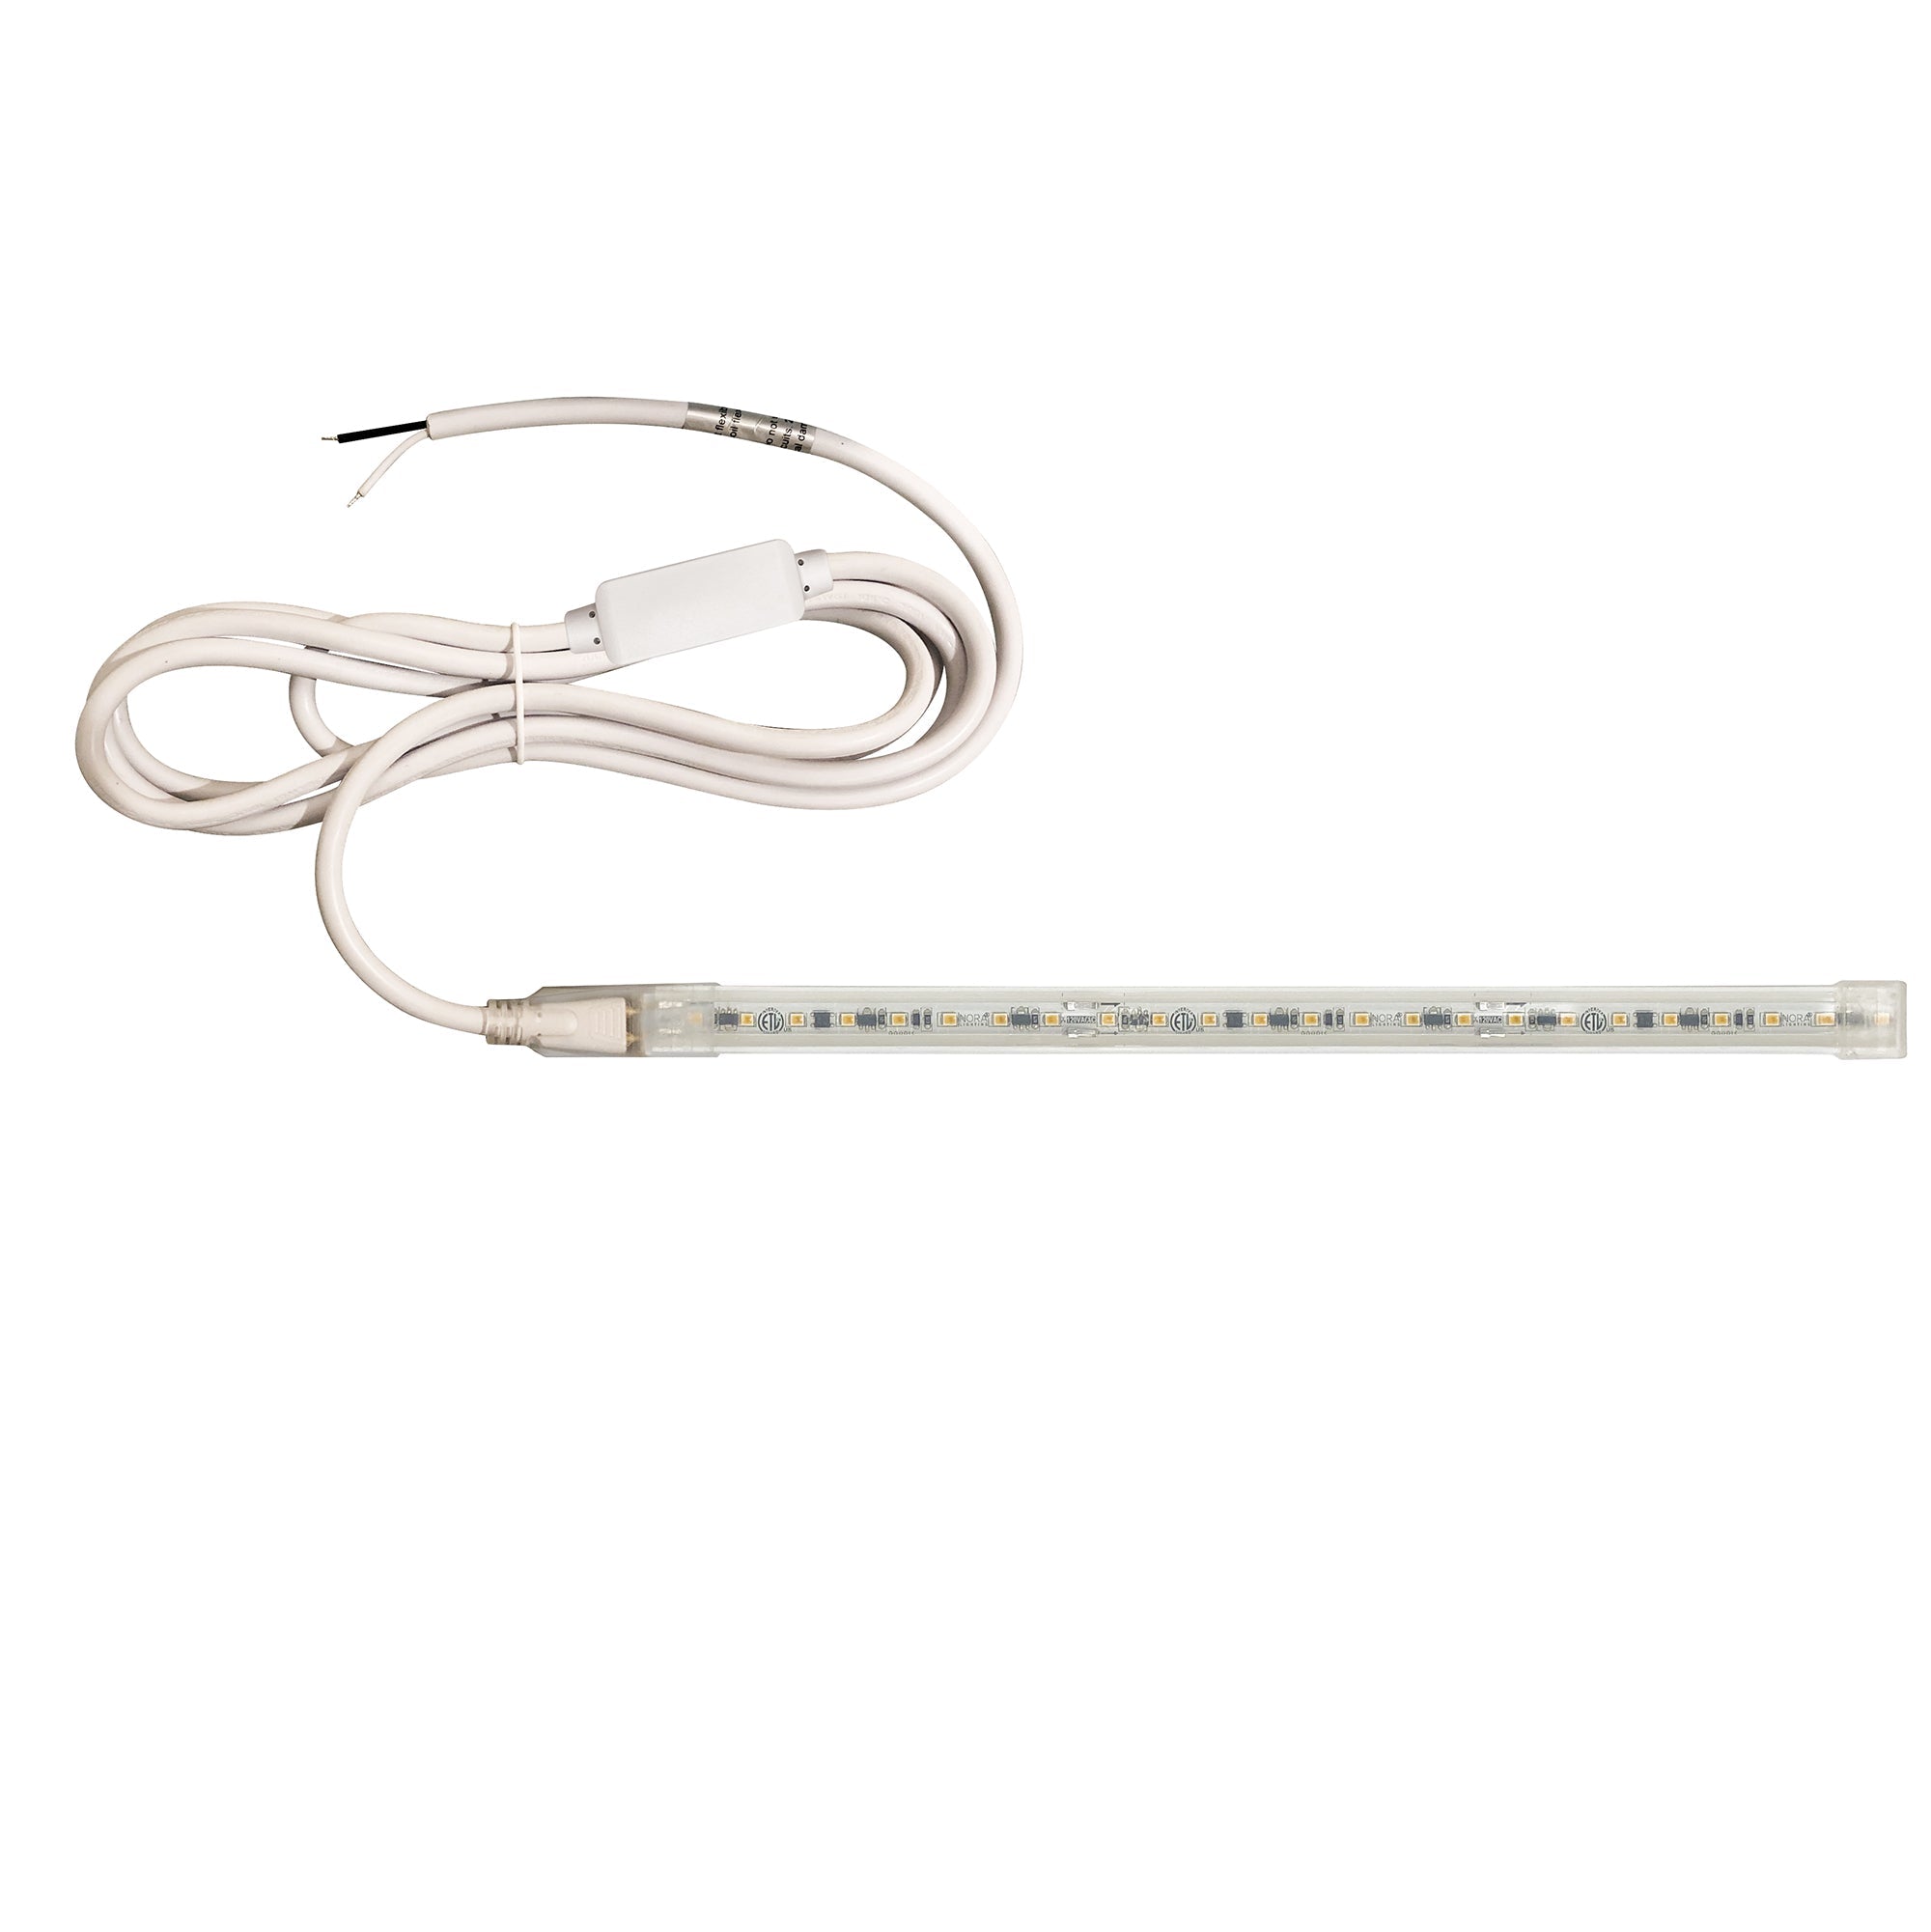 Nora Lighting NUTP13-W44-12-940/HWSP - Accent / Undercabinet - Custom Cut 44-ft 120V Continuous LED Tape Light, 330lm / 3.6W per foot, 4000K, w/ Mounting Clips and 8' Hardwired Power Cord w/ Surge Protector